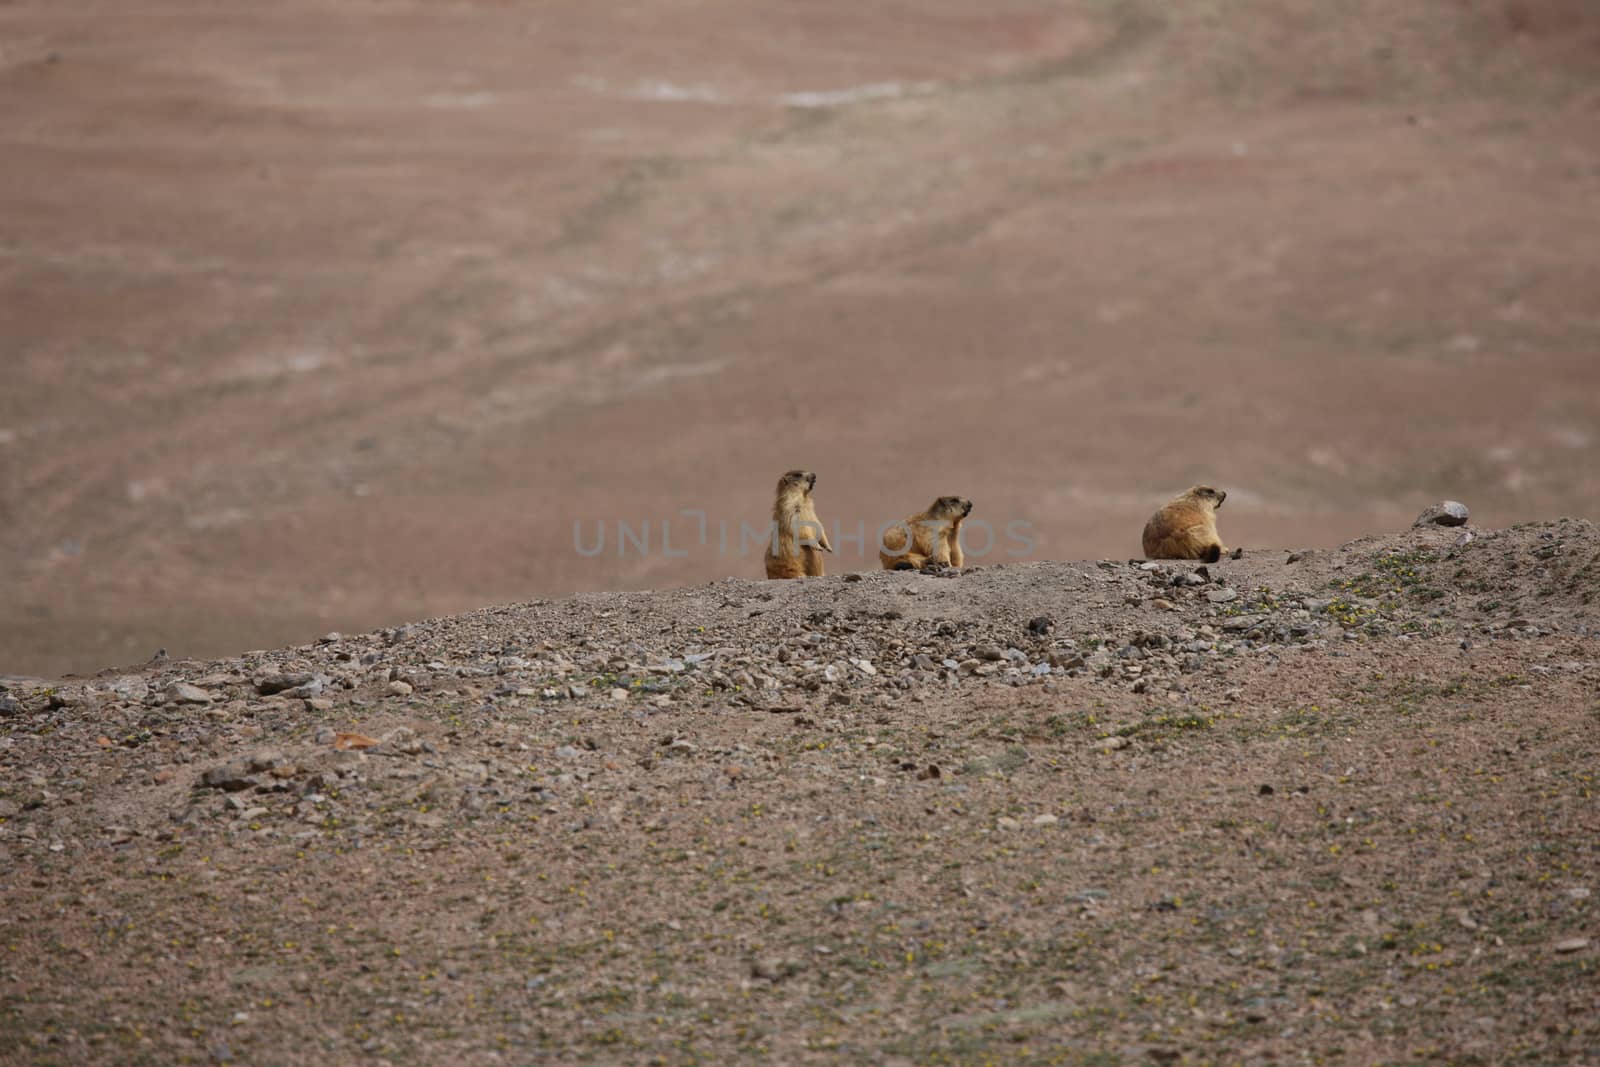 gopher small african mammal animal by desant7474